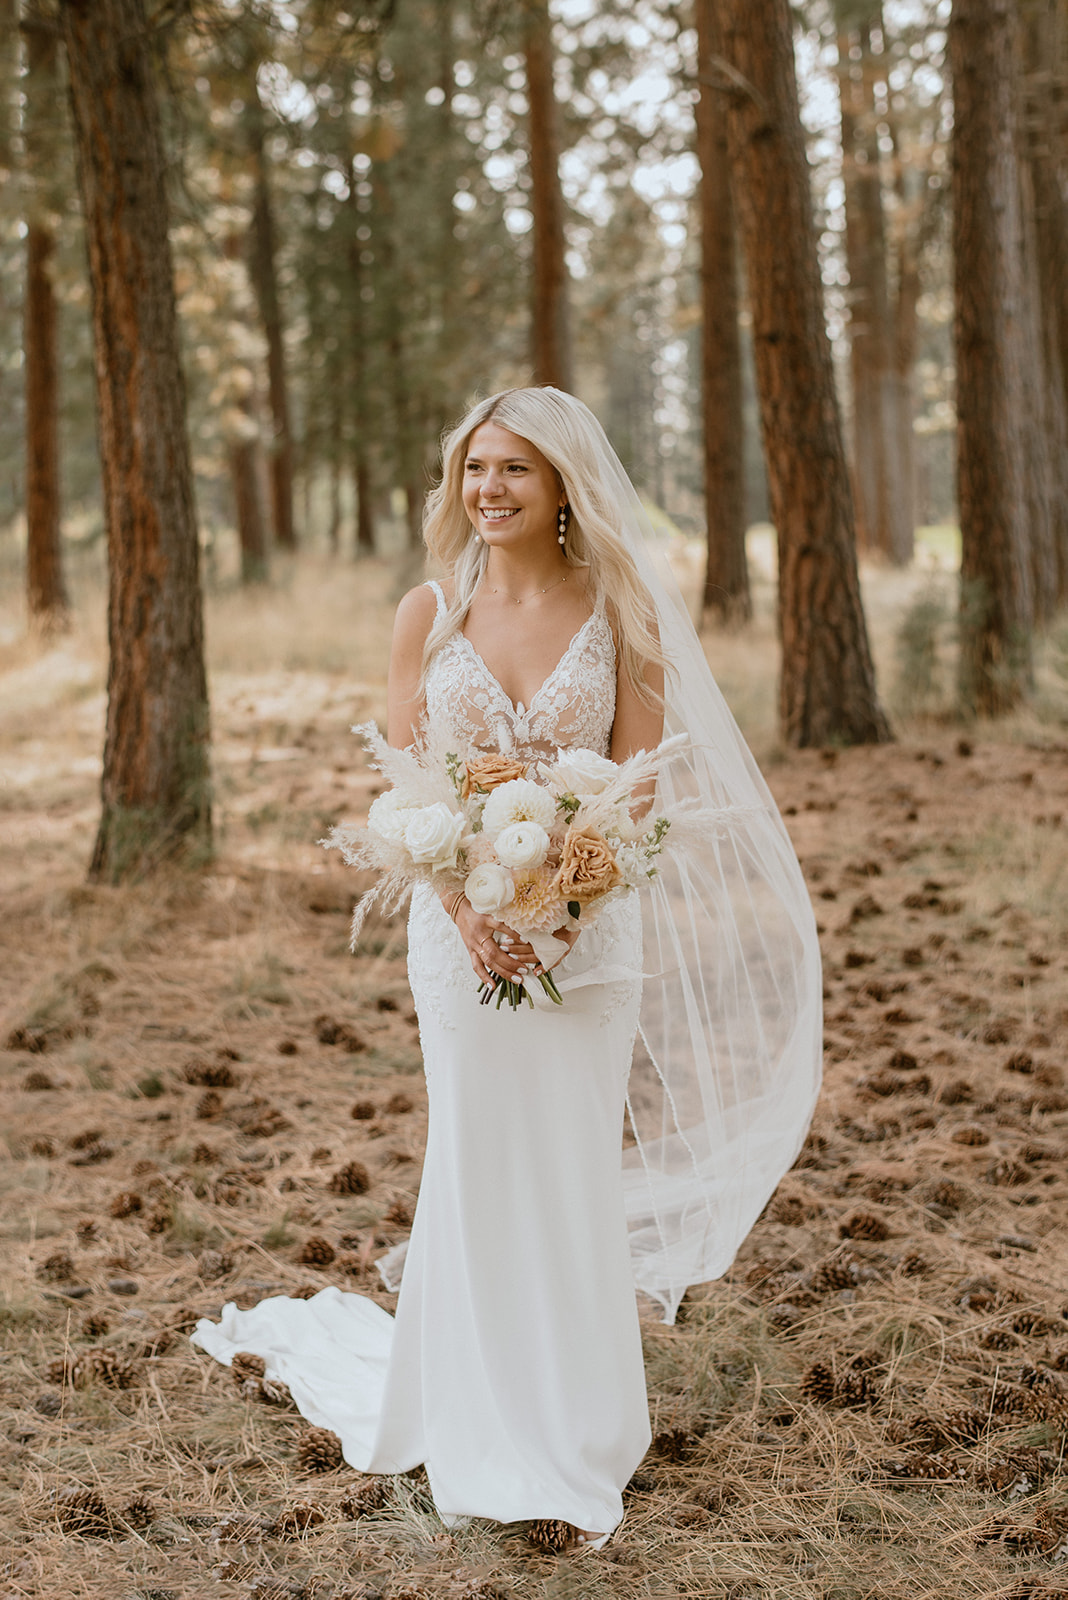 Bride with boho wedding bouquet with toffee roses and white dahlias, and a long white veil in the wind